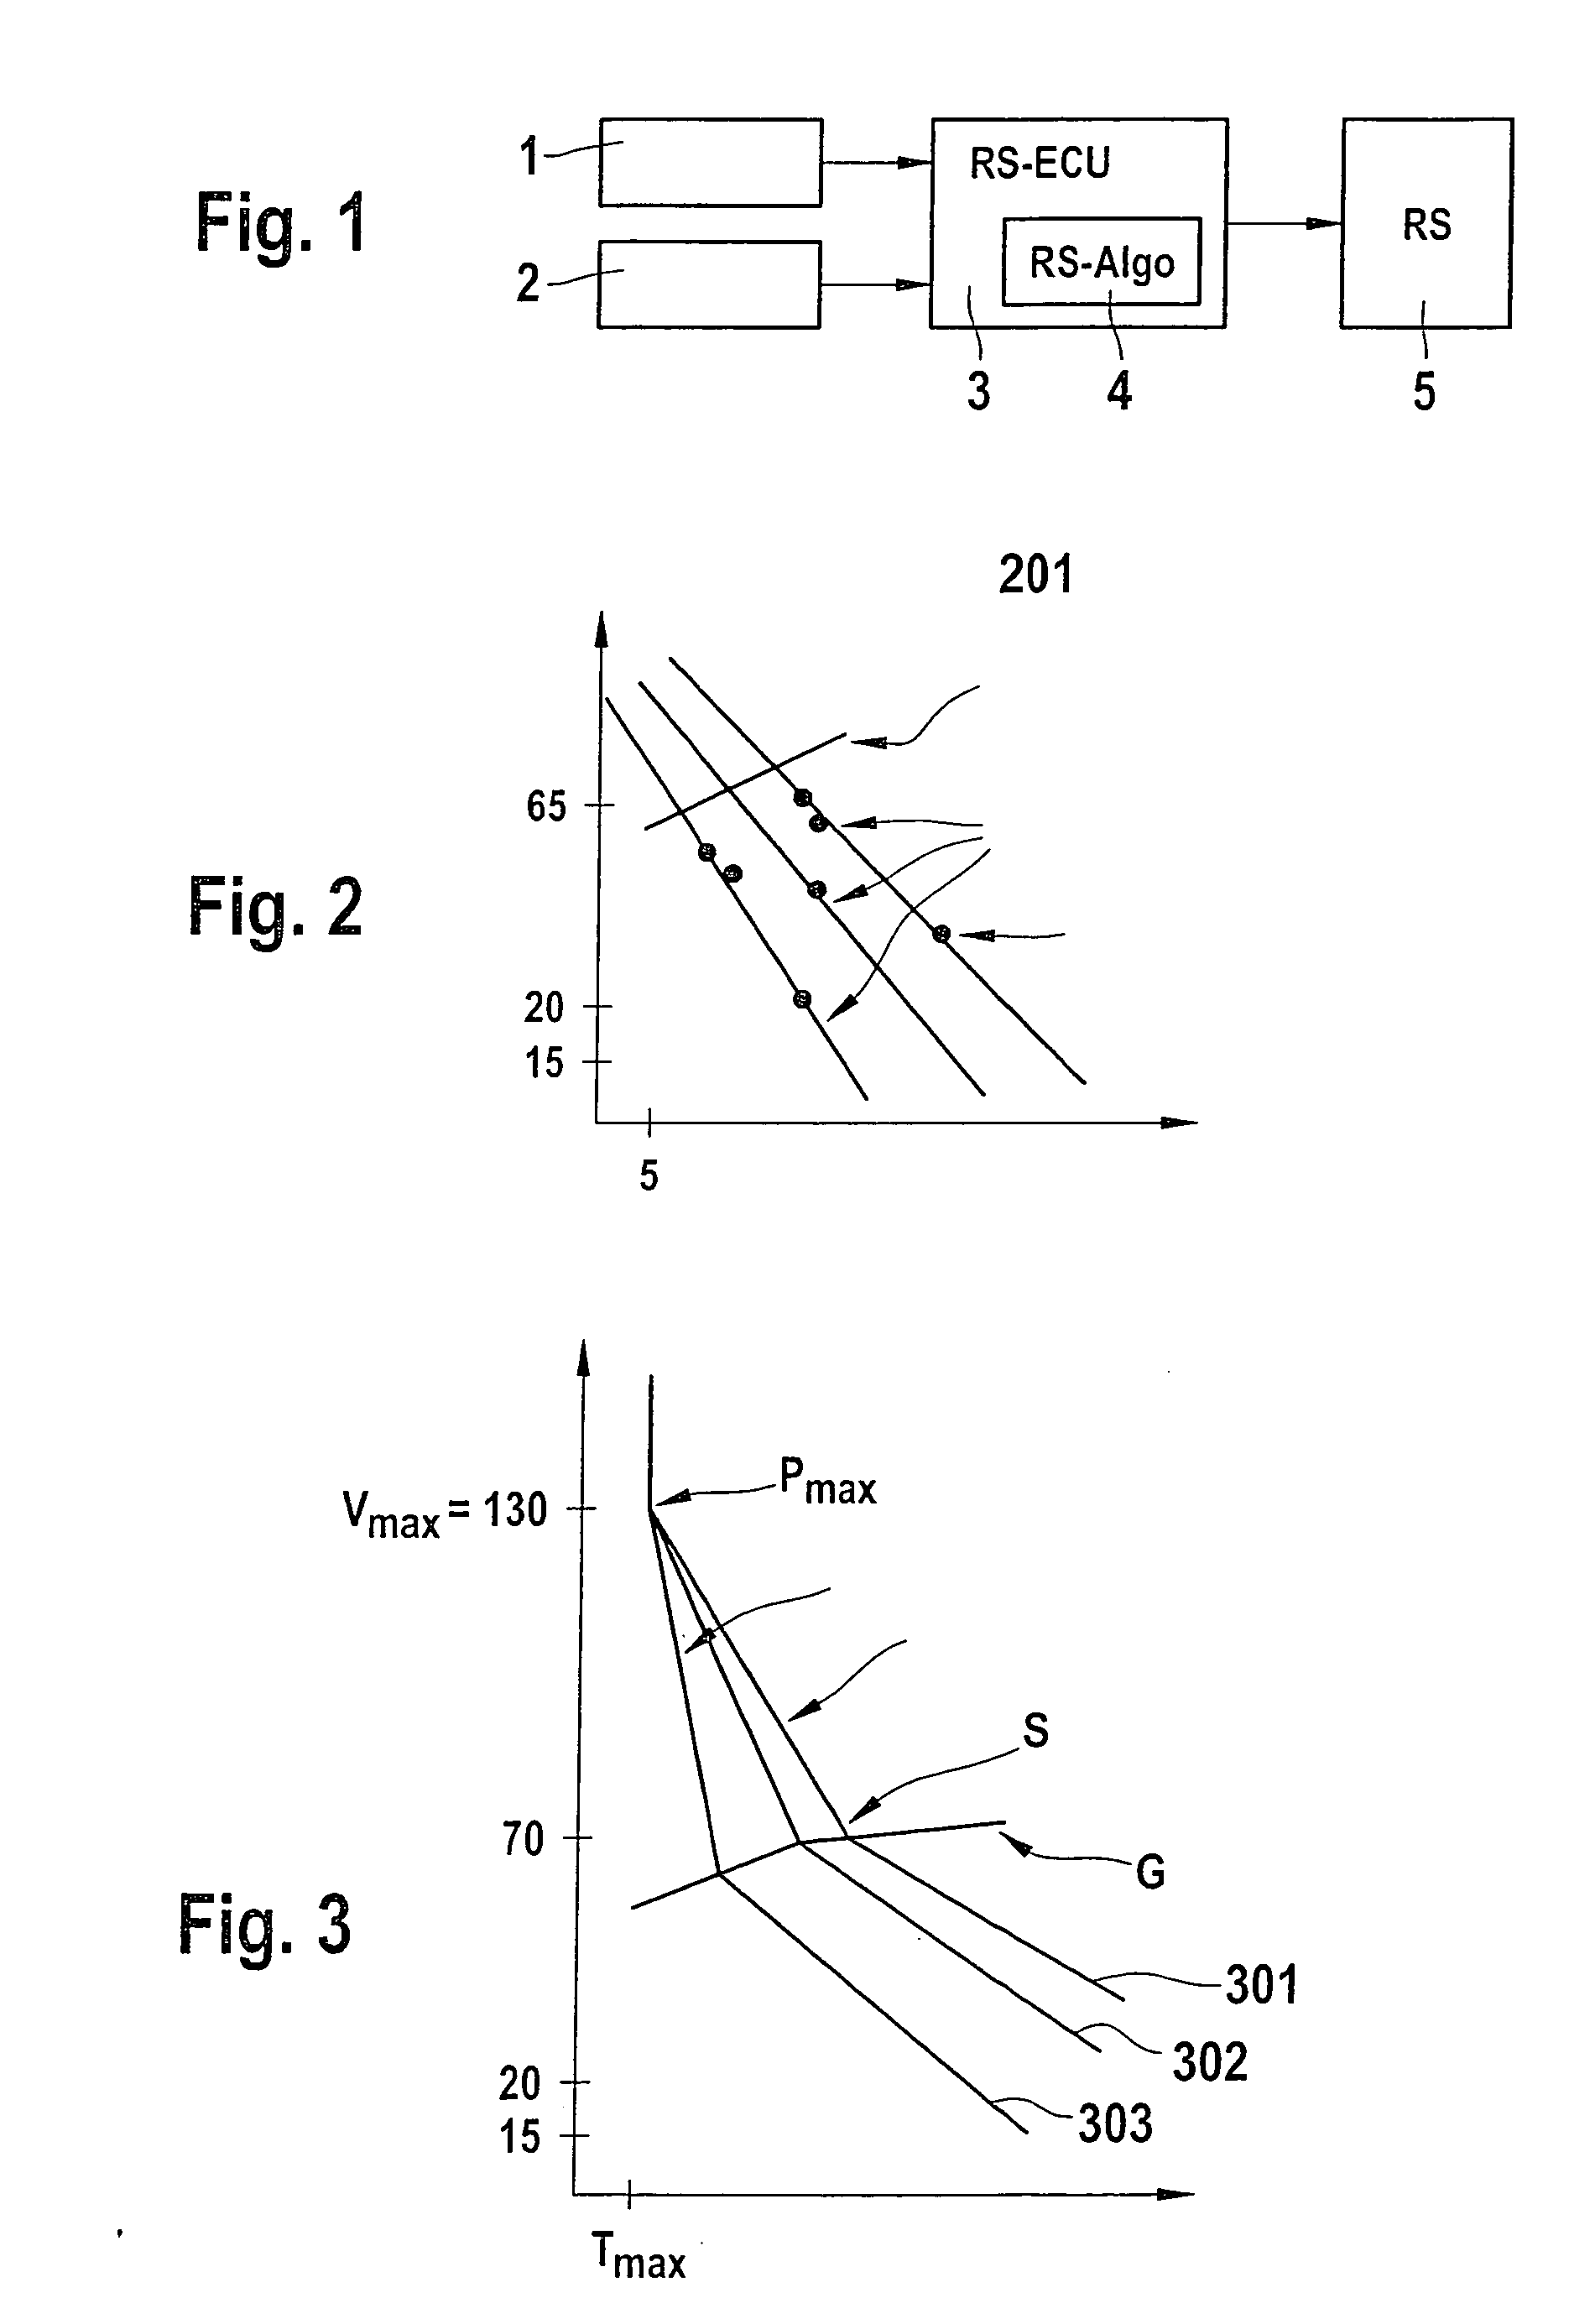 Method for activating a restraint system in a vehicle